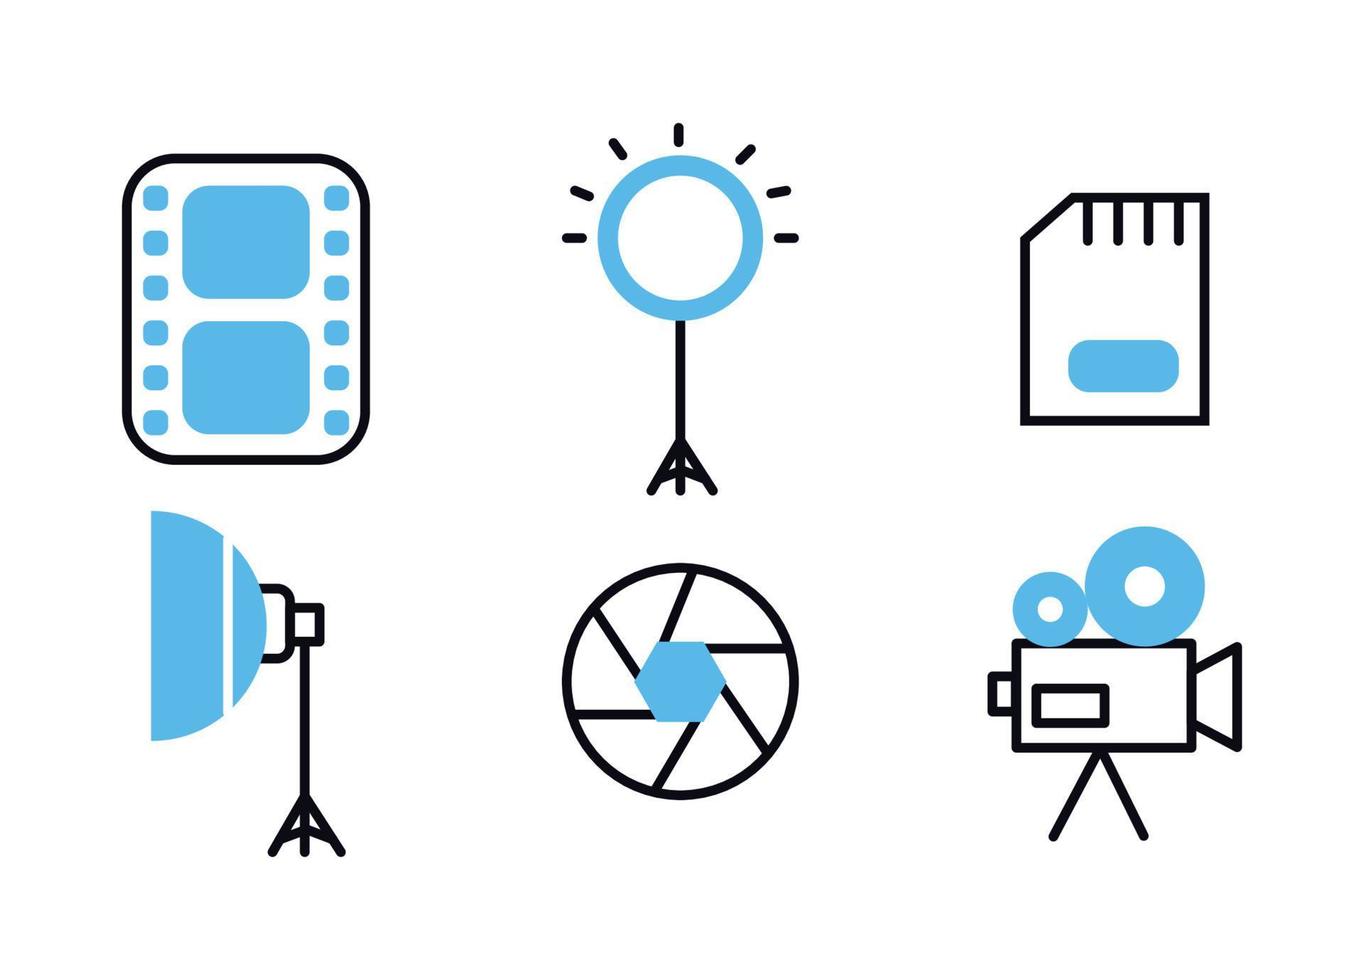 Photographer icon set with blue color. Photographer equipment icons. Film, ring lamp, memory card, softbox, shutter, camcorder vector